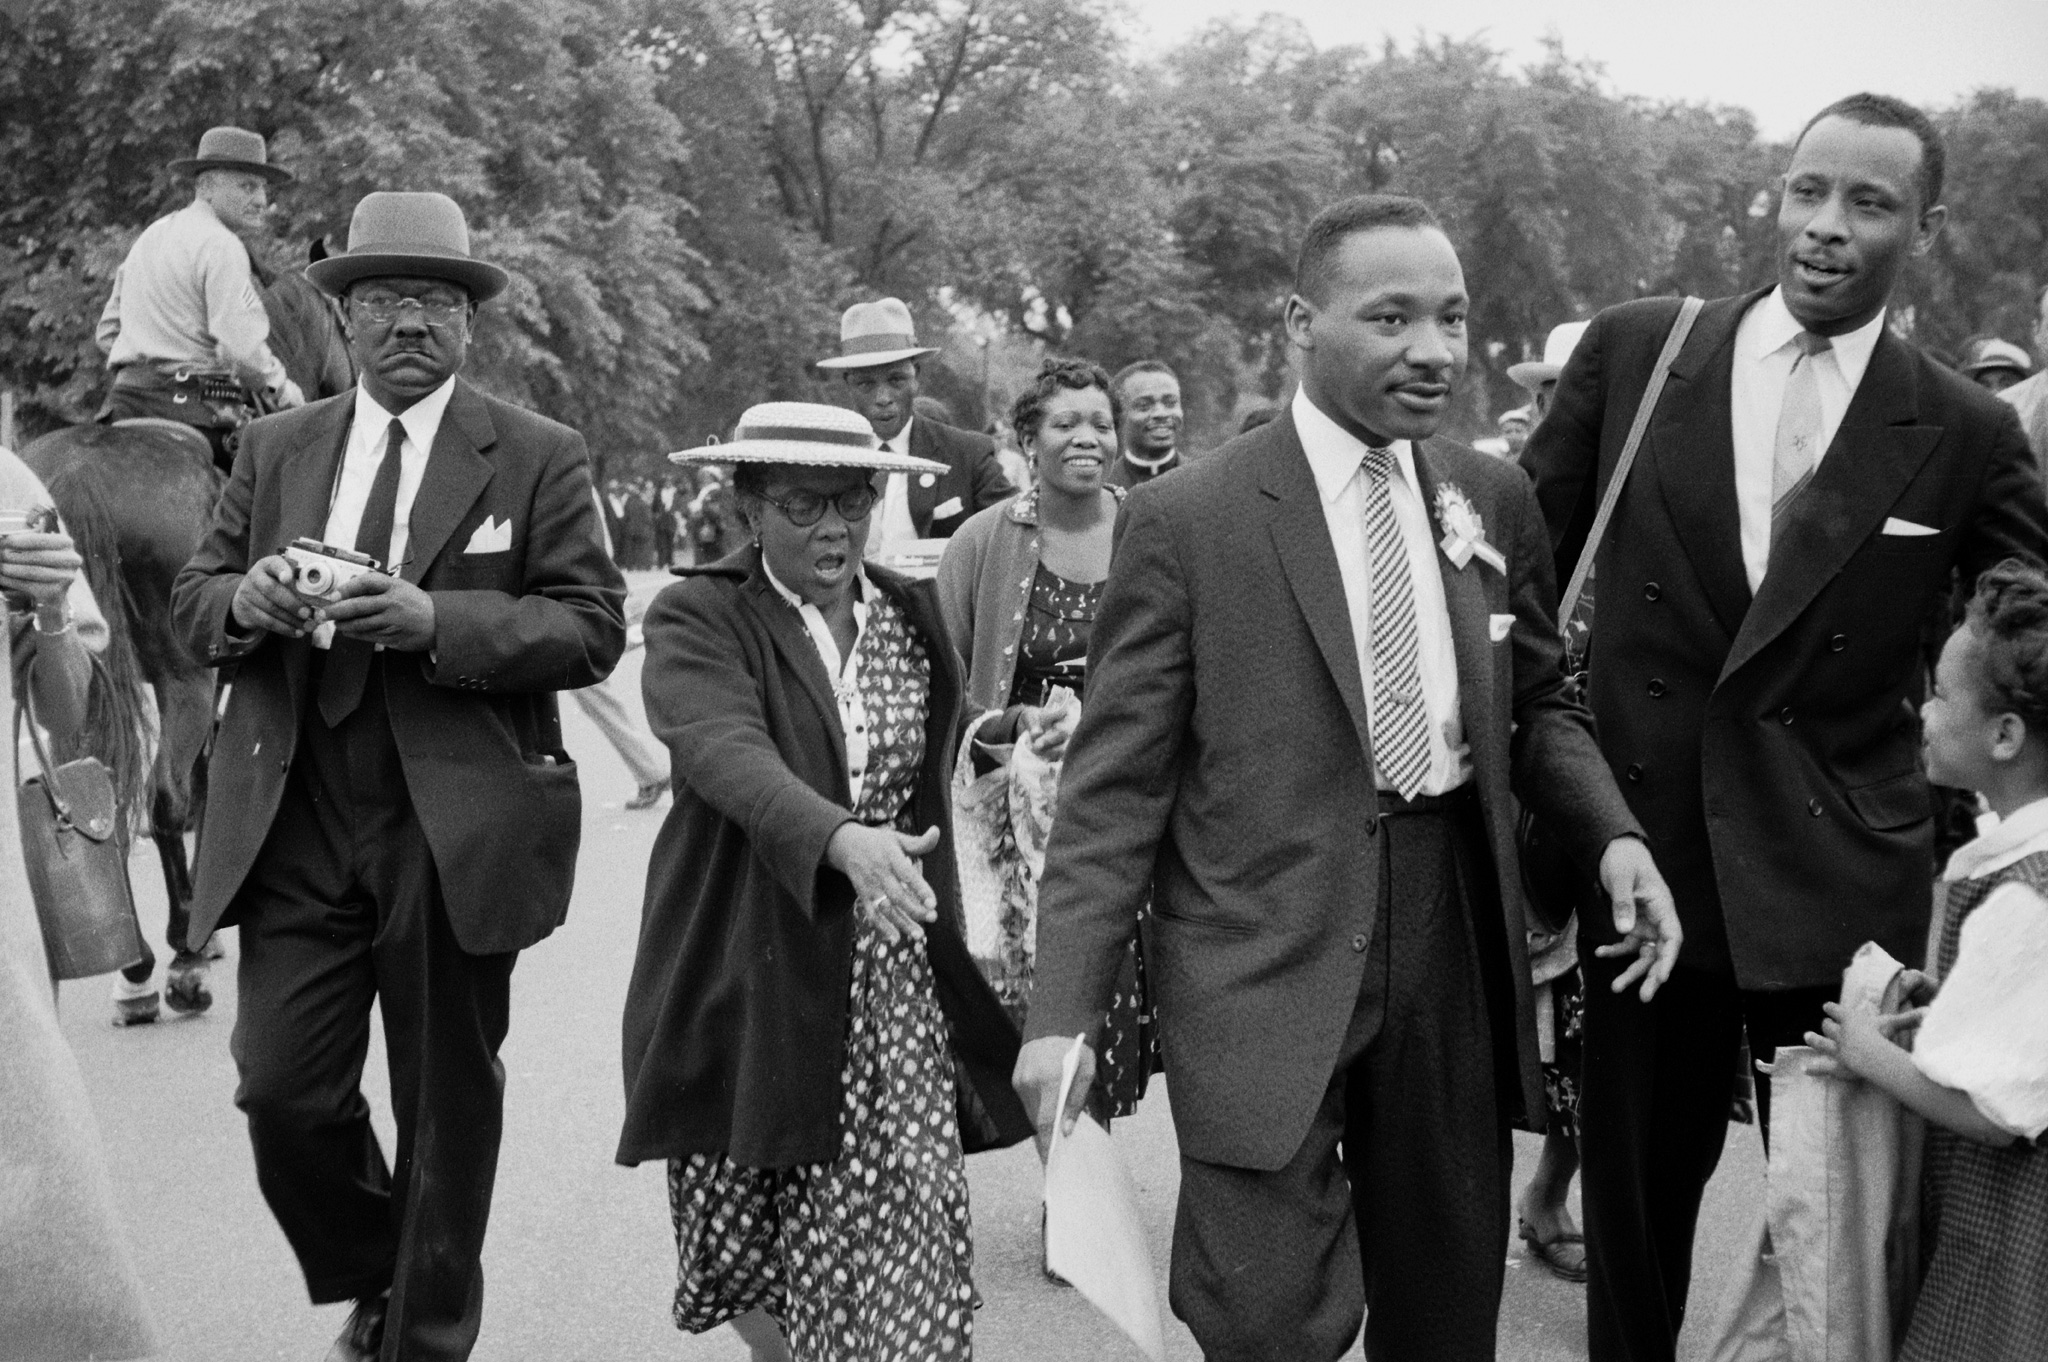 Civil Rights leader Dr. Martin Luther King attends a prayer pilgrimage, May 17, 1957, Washington, D.C., on the third anniversary of the landmark Brown v. the Board of Education decision against segregation in public schools.